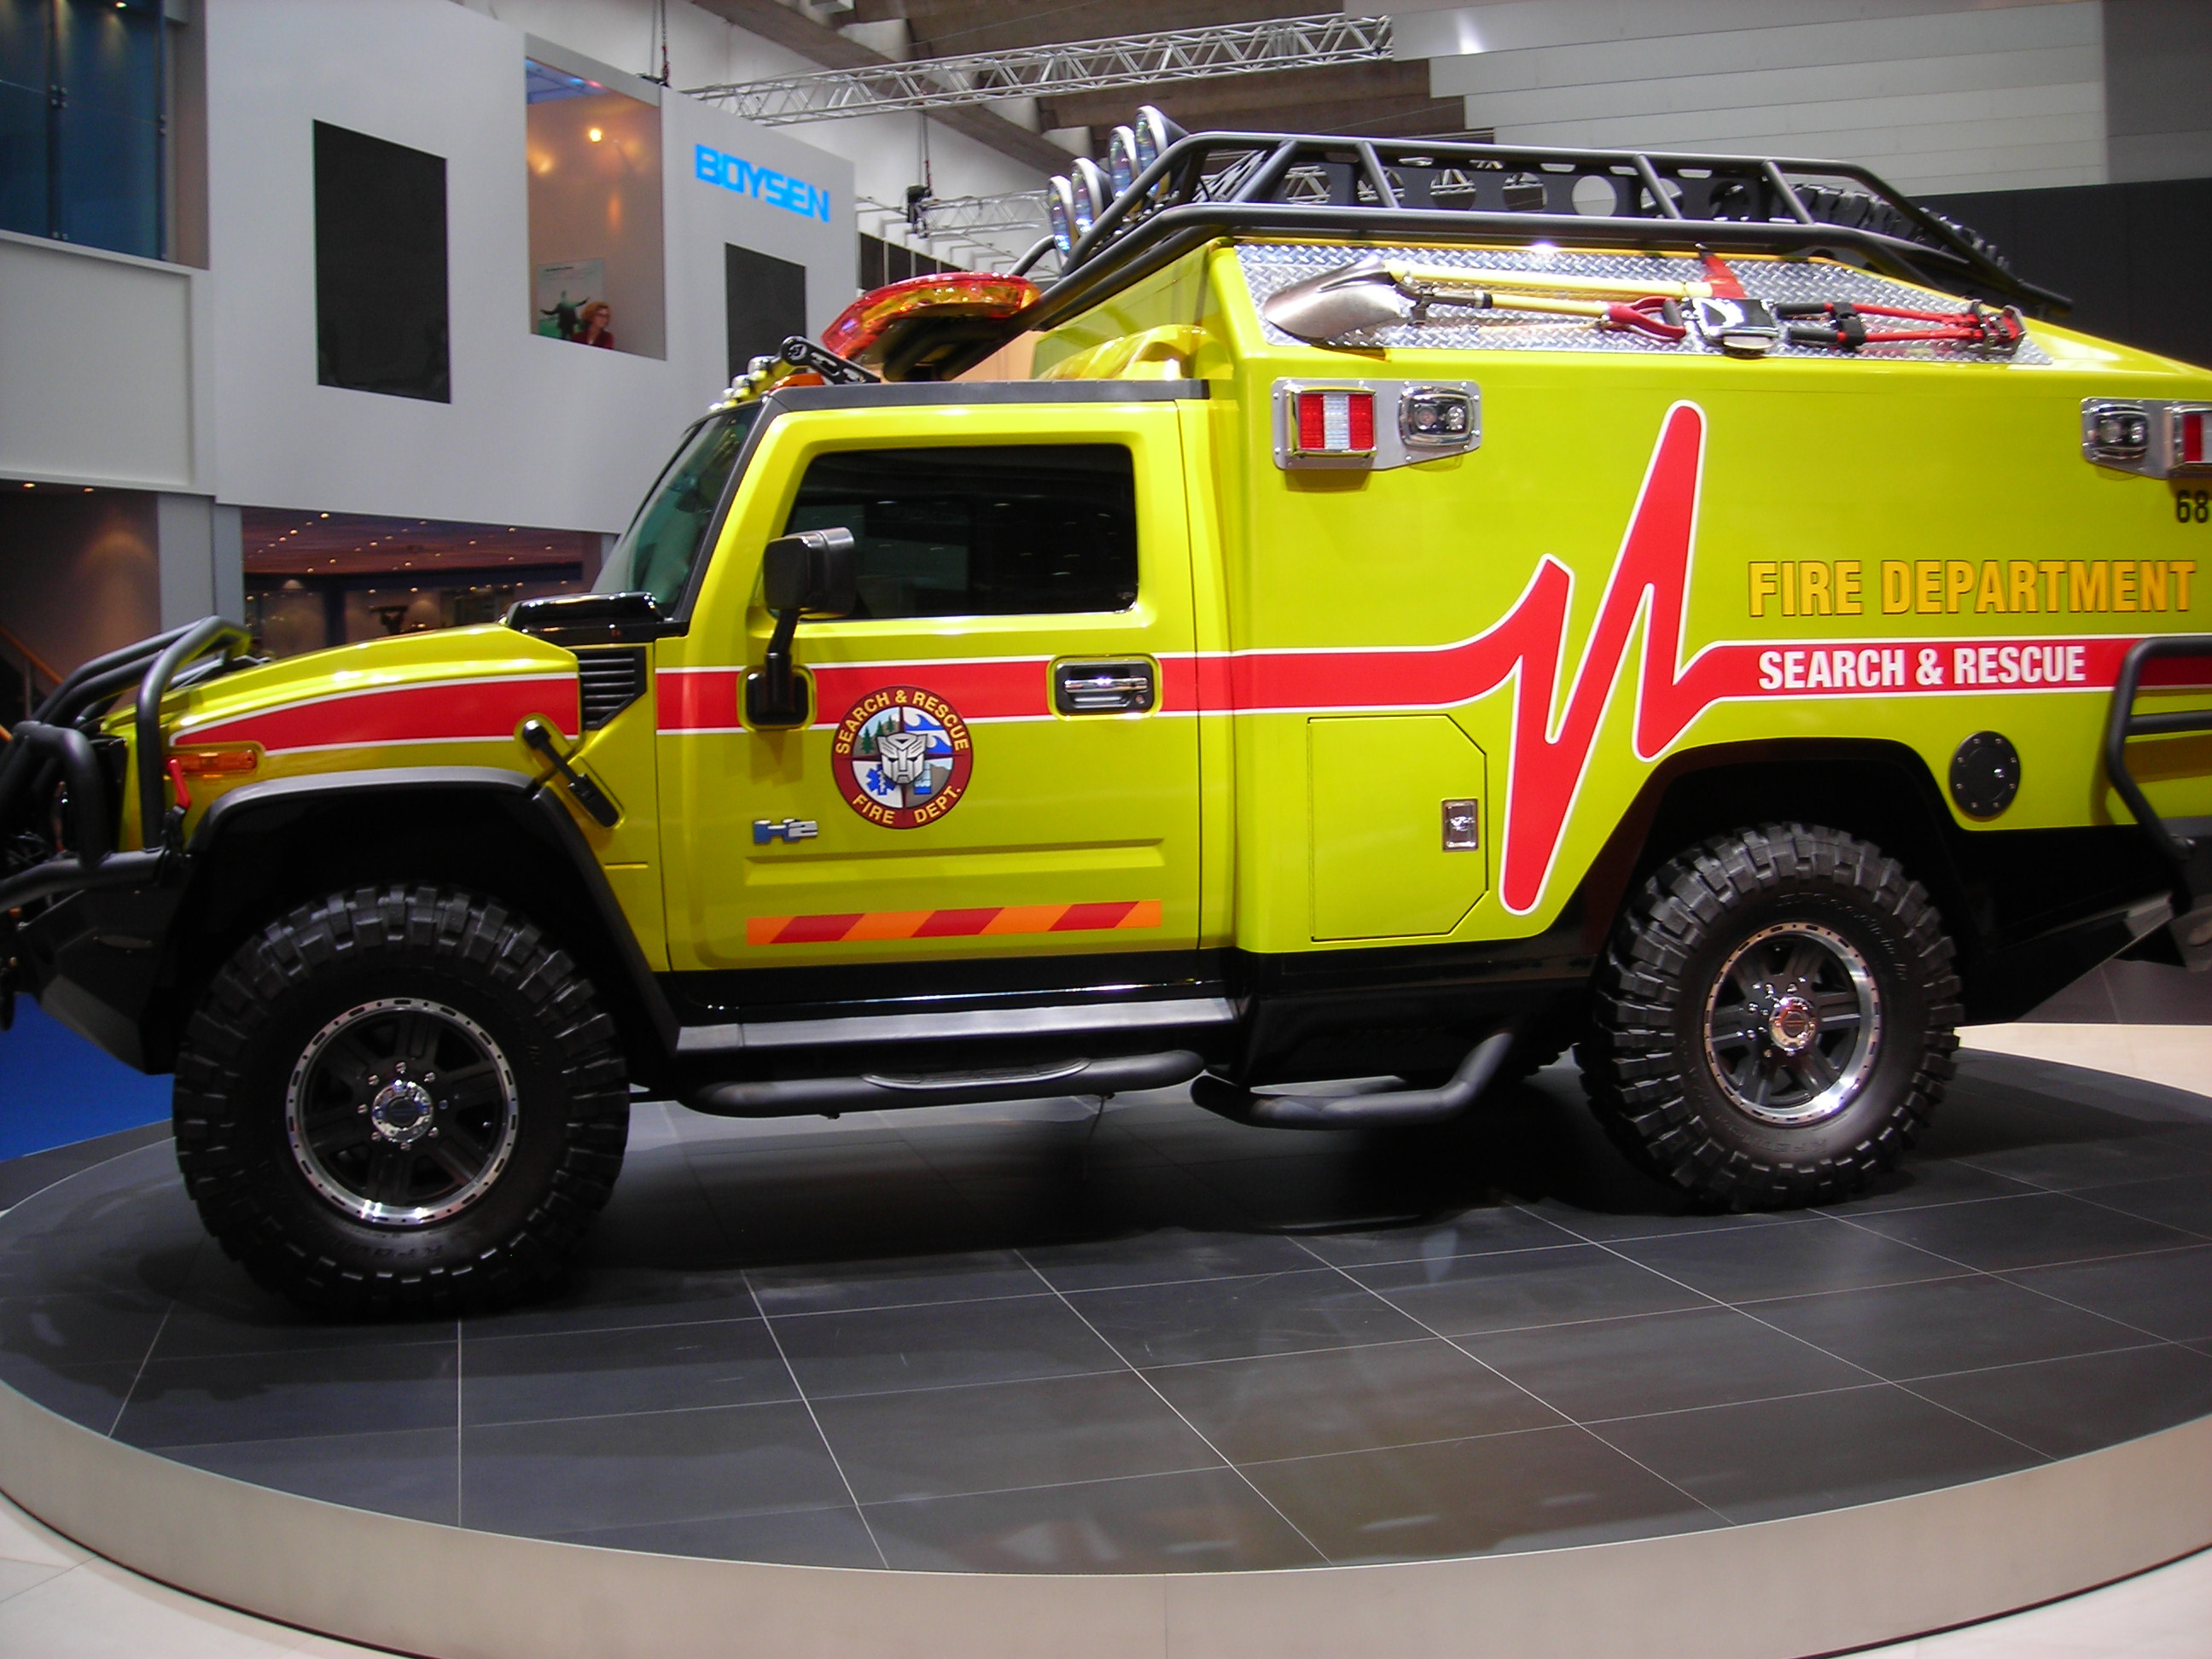 Hummer Rescue Vehicle | Flickr - Photo Sharing!